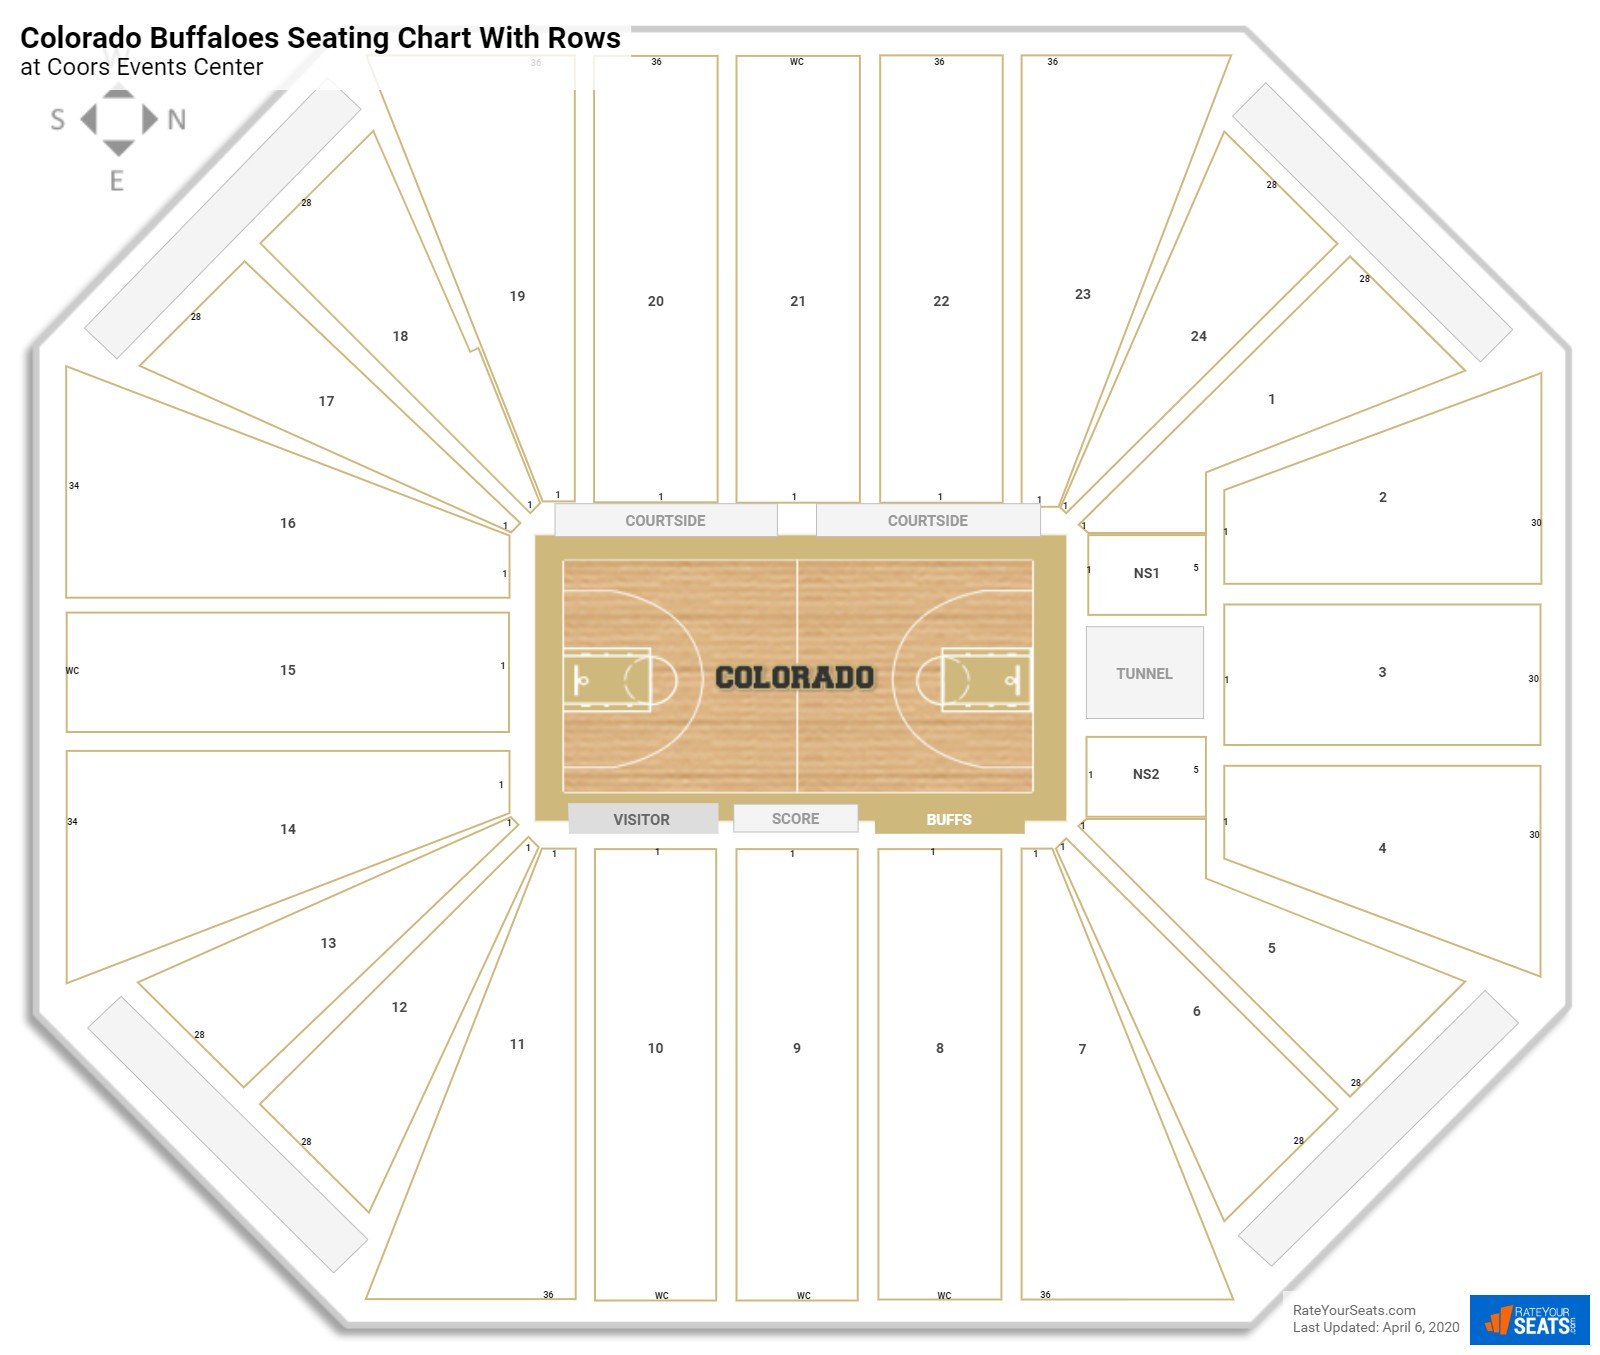 CU Events Center seating chart with row numbers